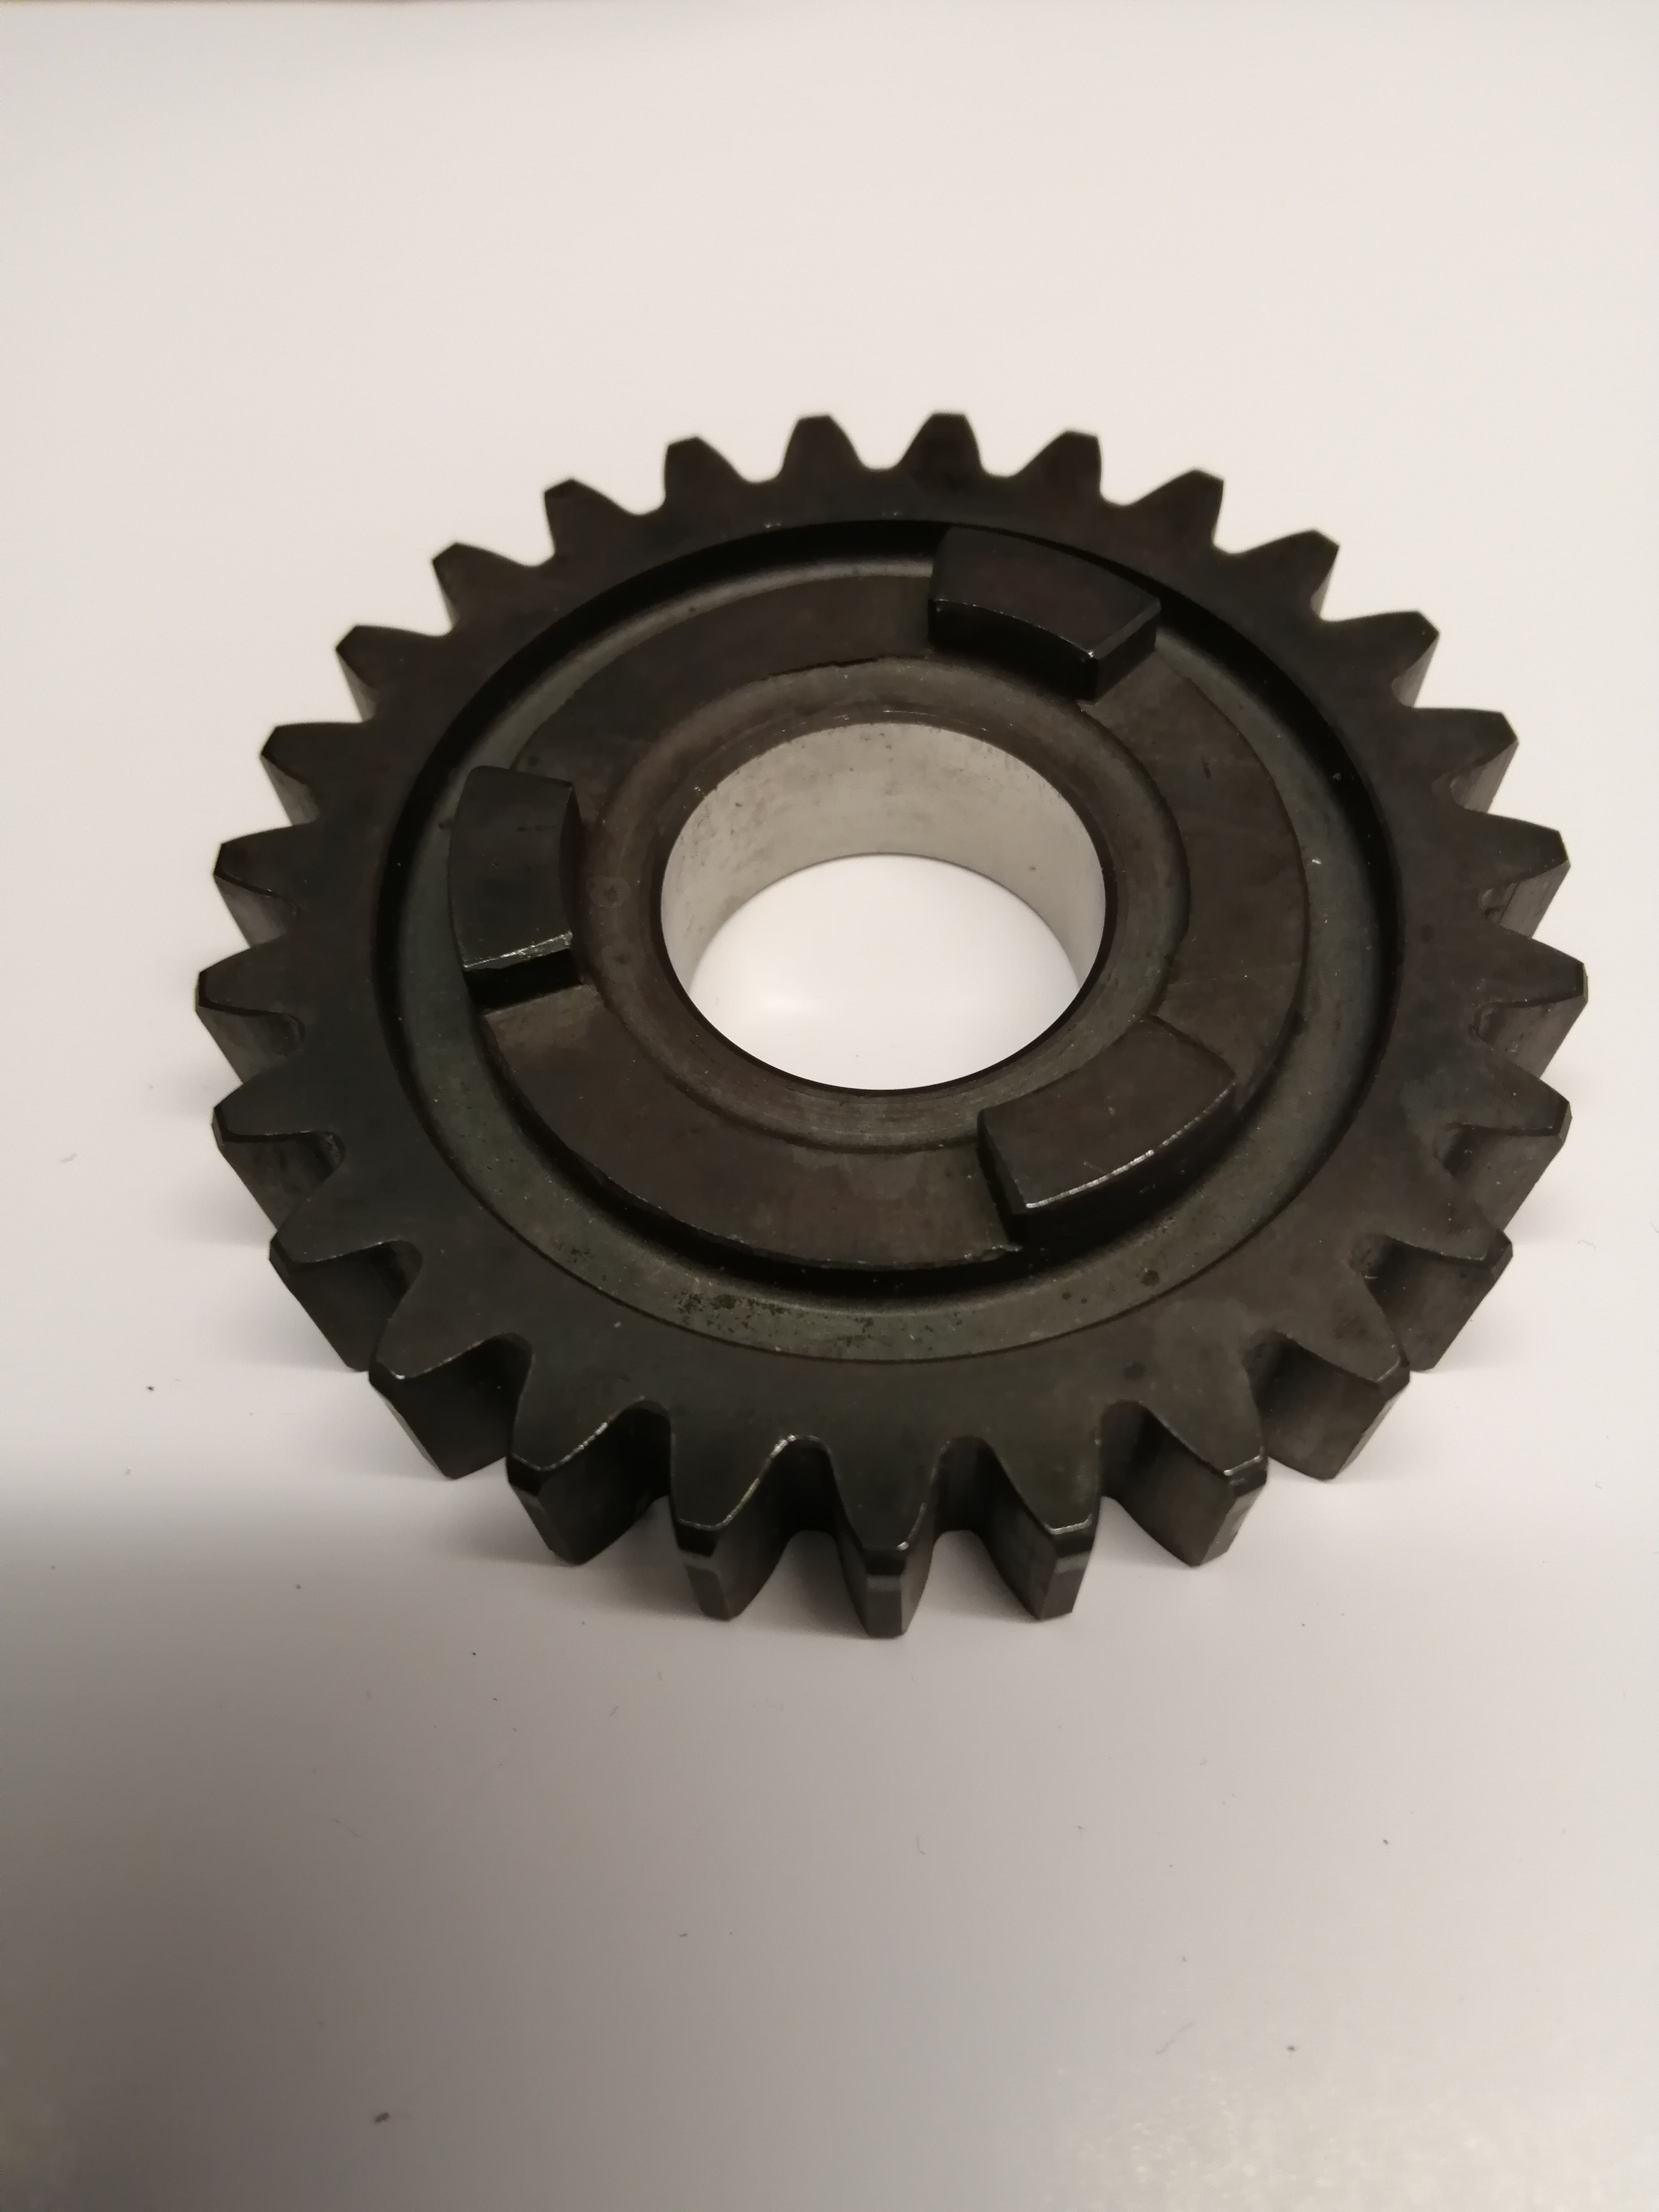 101405 - 24000601 27T input - Idler Gear 6th suits all FC models 1989-1993. All FEs 1994-2000